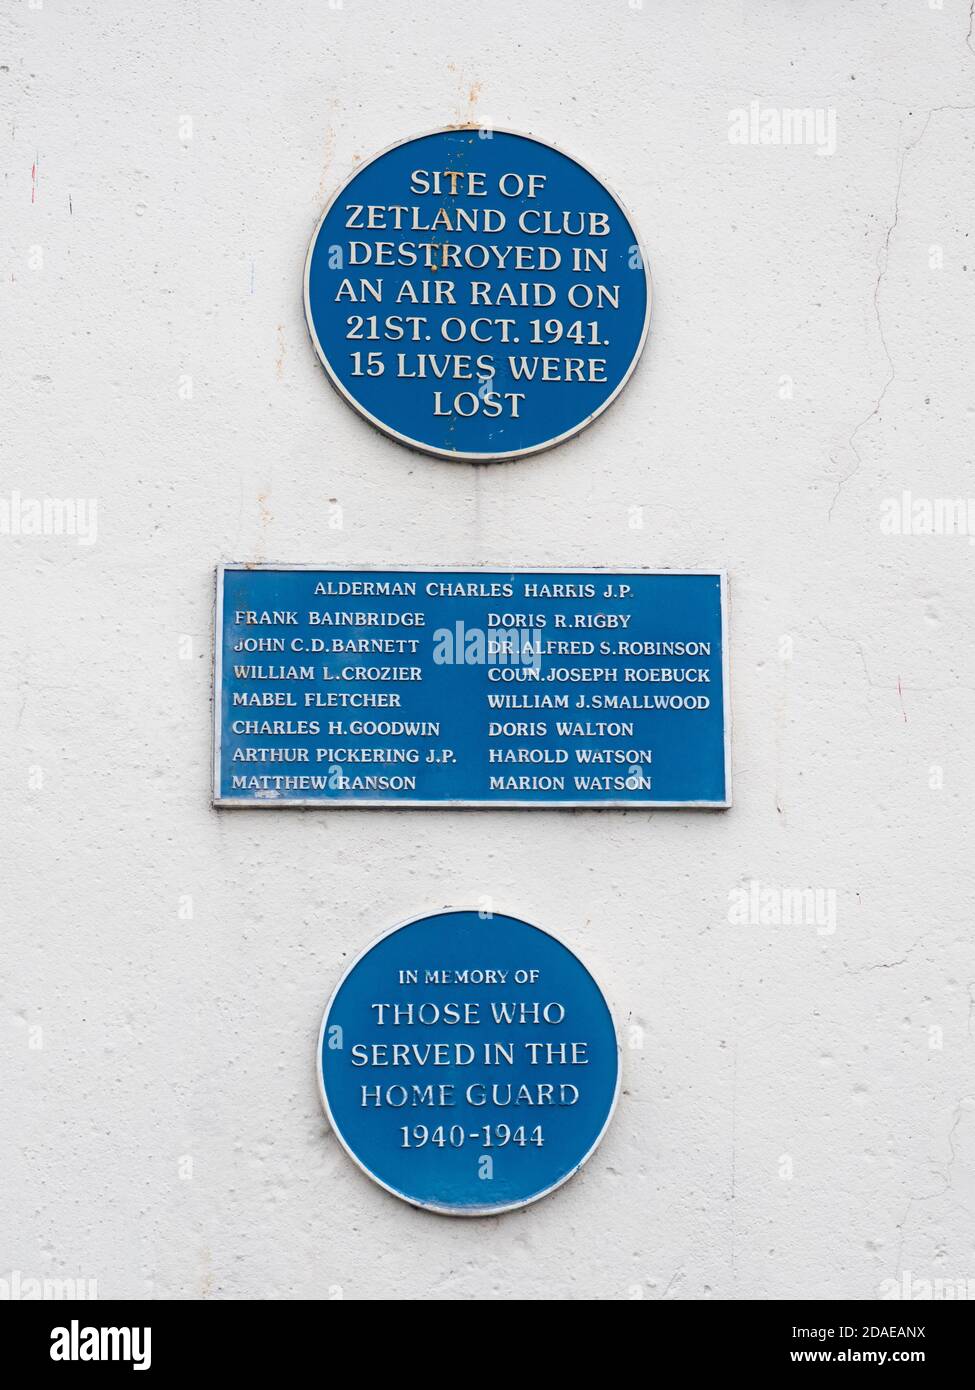 Plaques in the Remembrance Garden in Redcar site of the Zetland Club destroyed in an air raid on 21/10/1941 loss of 15 lives names listed and a plaque Stock Photo